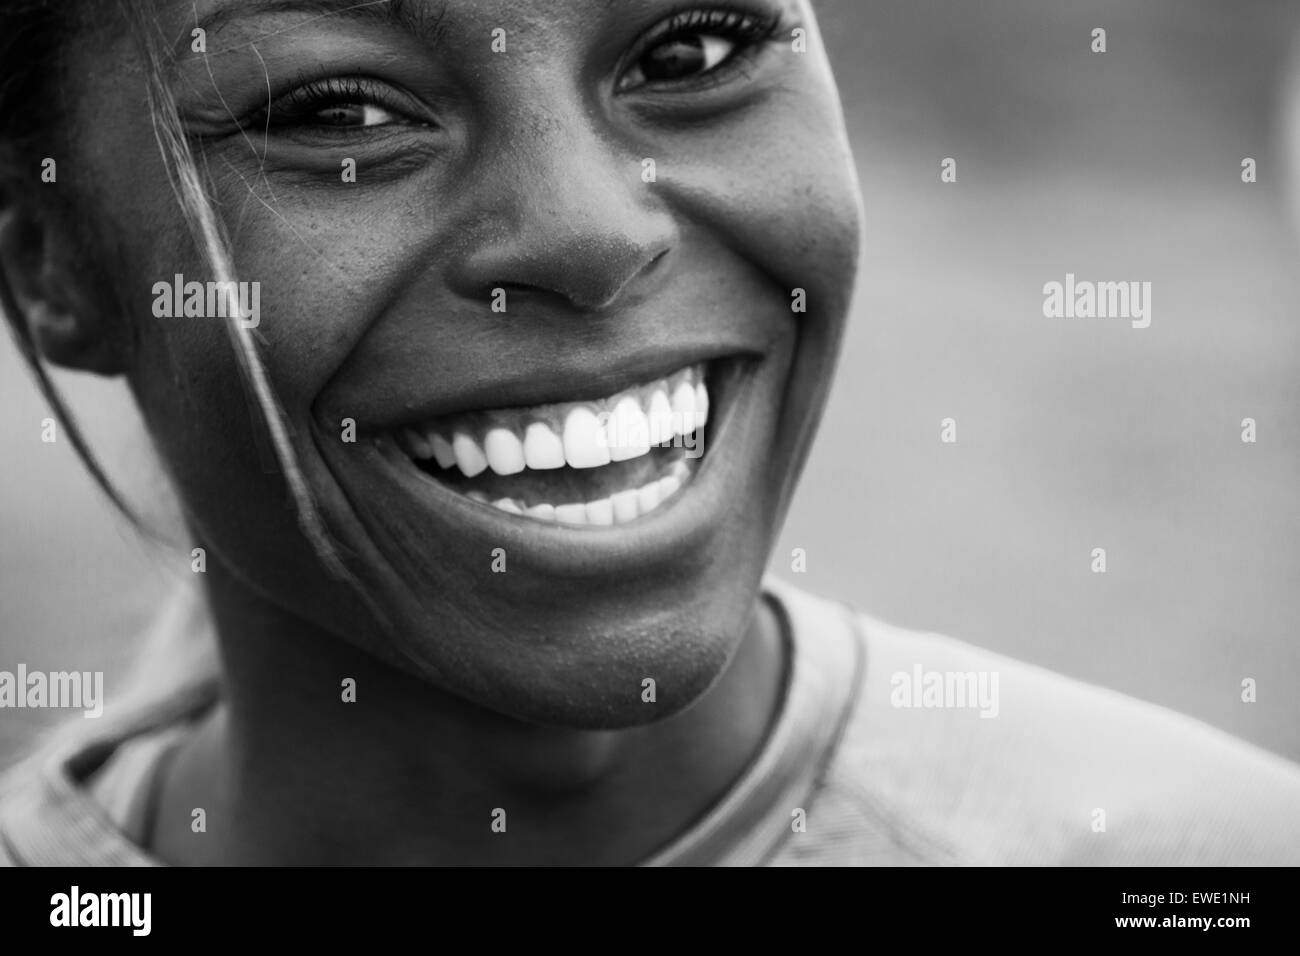 a smiling young black woman face vitality Stock Photo